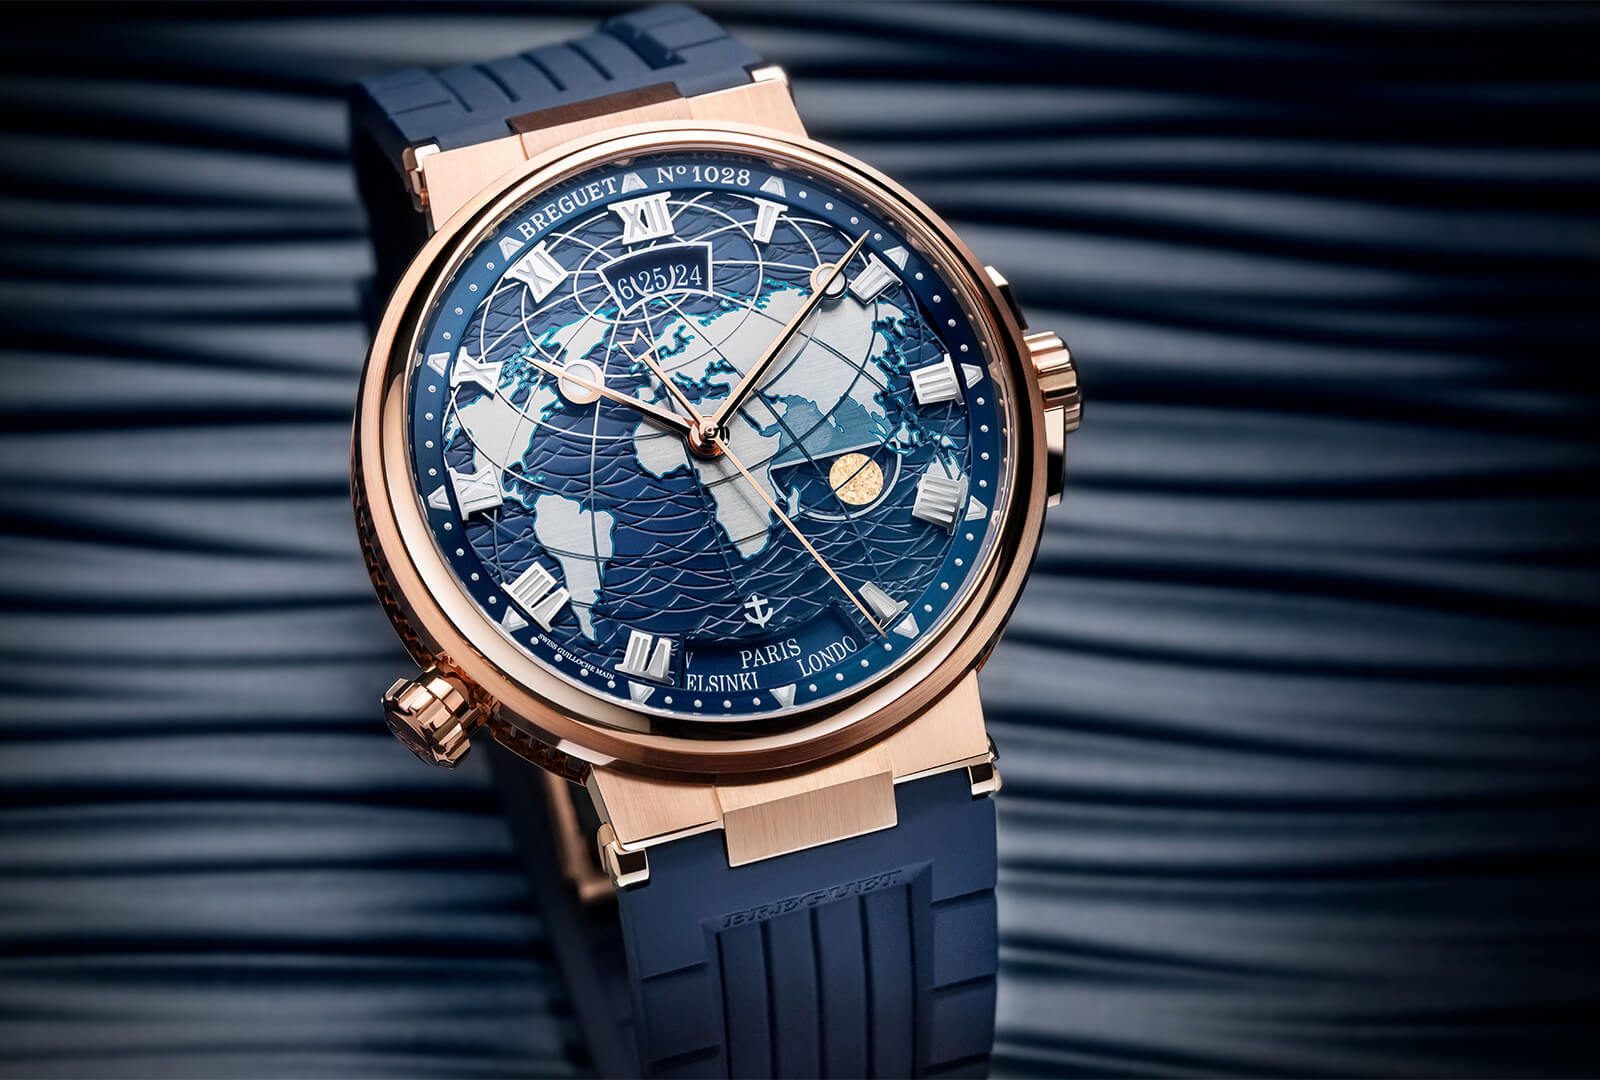 The Breguet Marine Hora Mundi 5557. Click here to find out more.